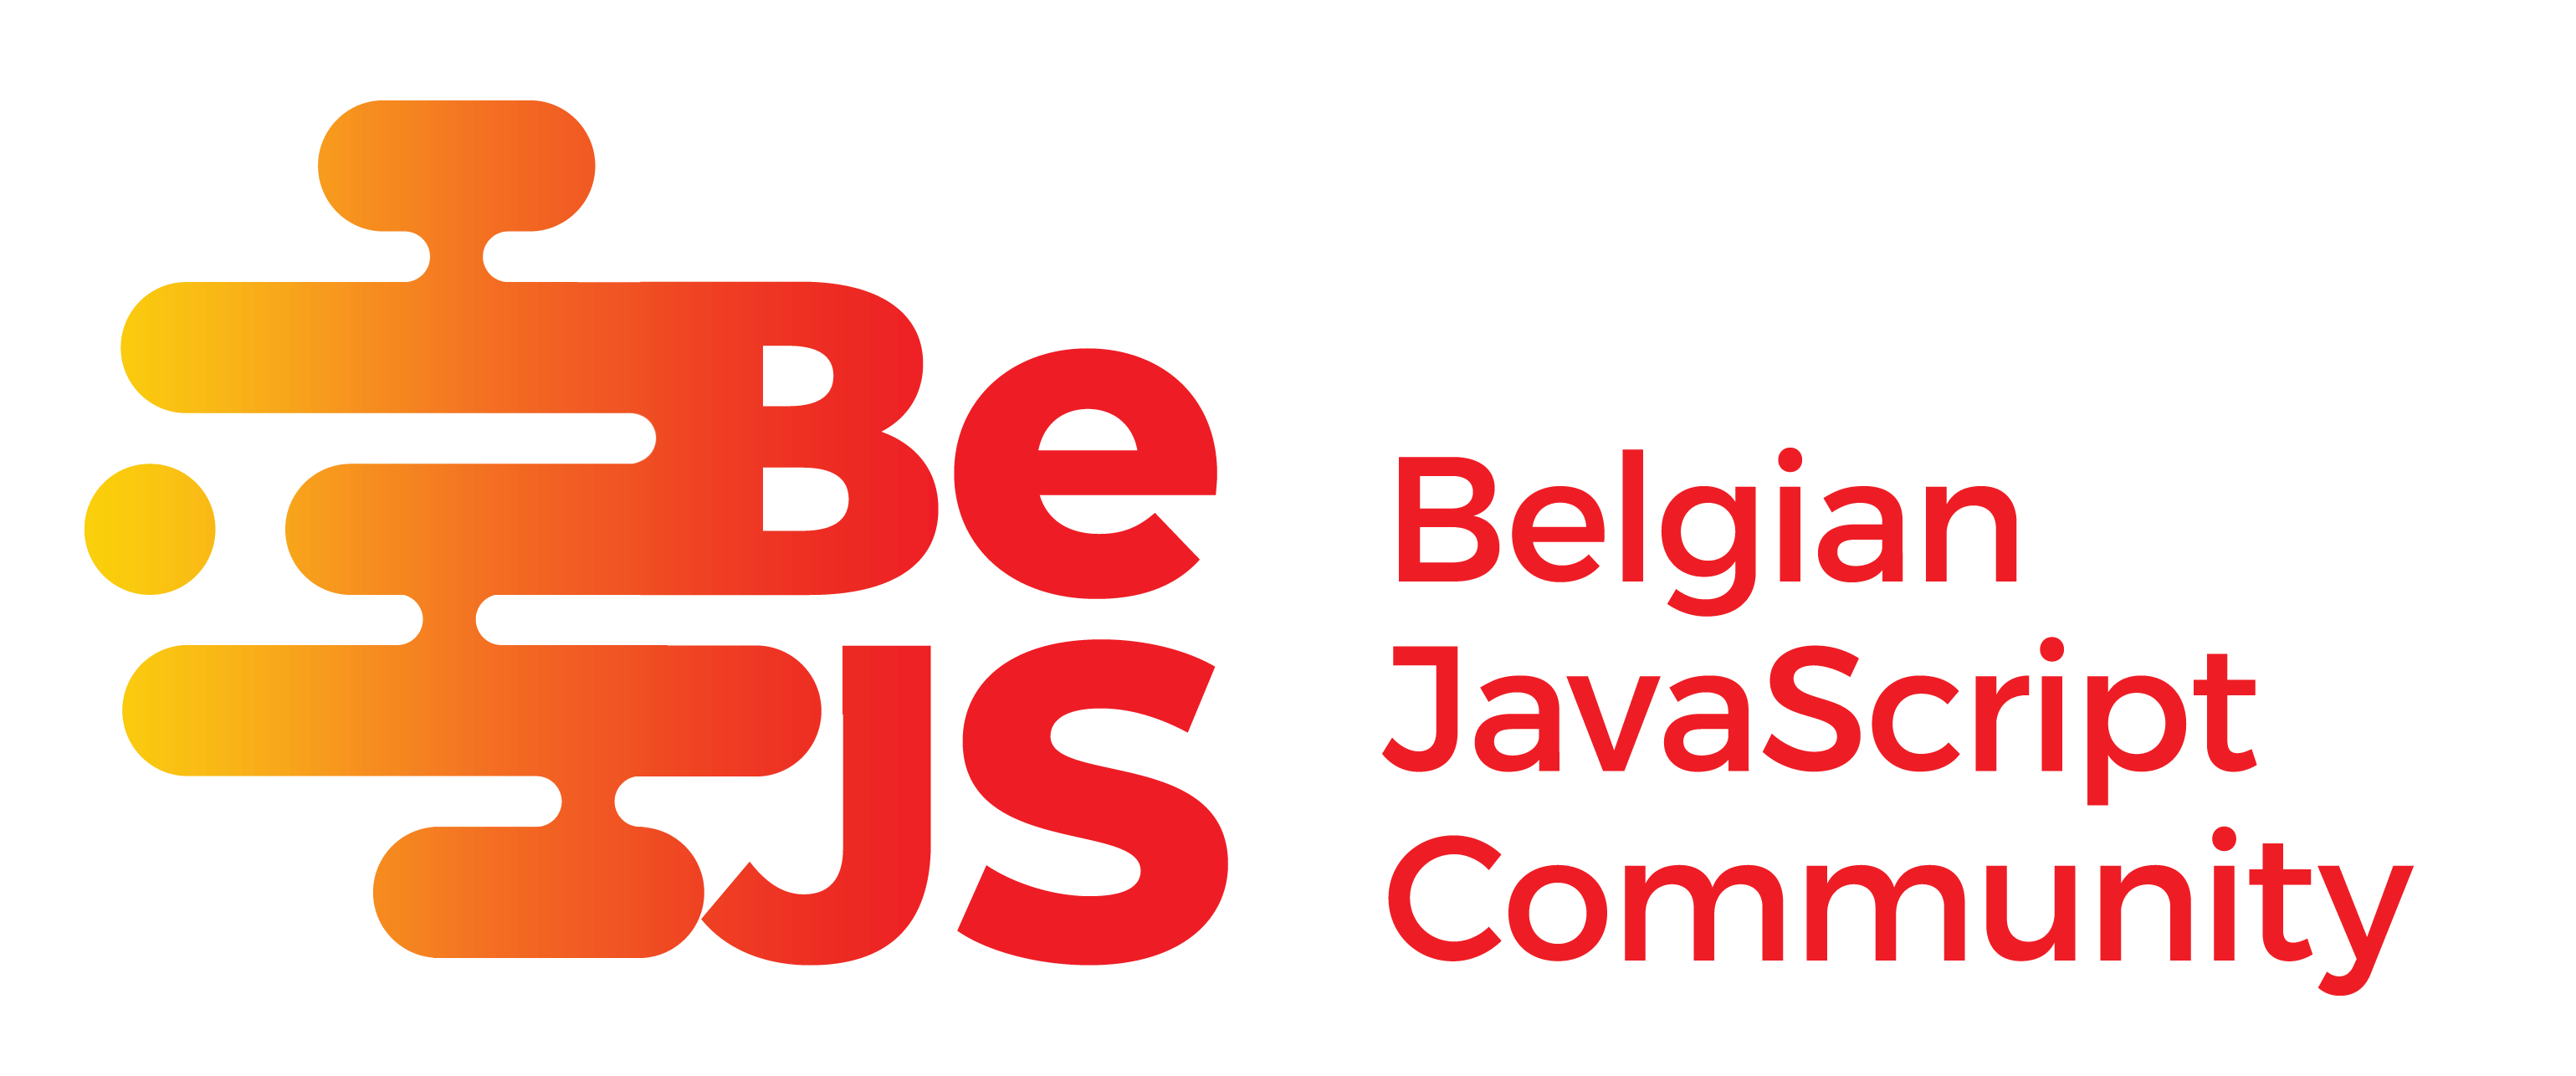 Supported by the BEJS Community